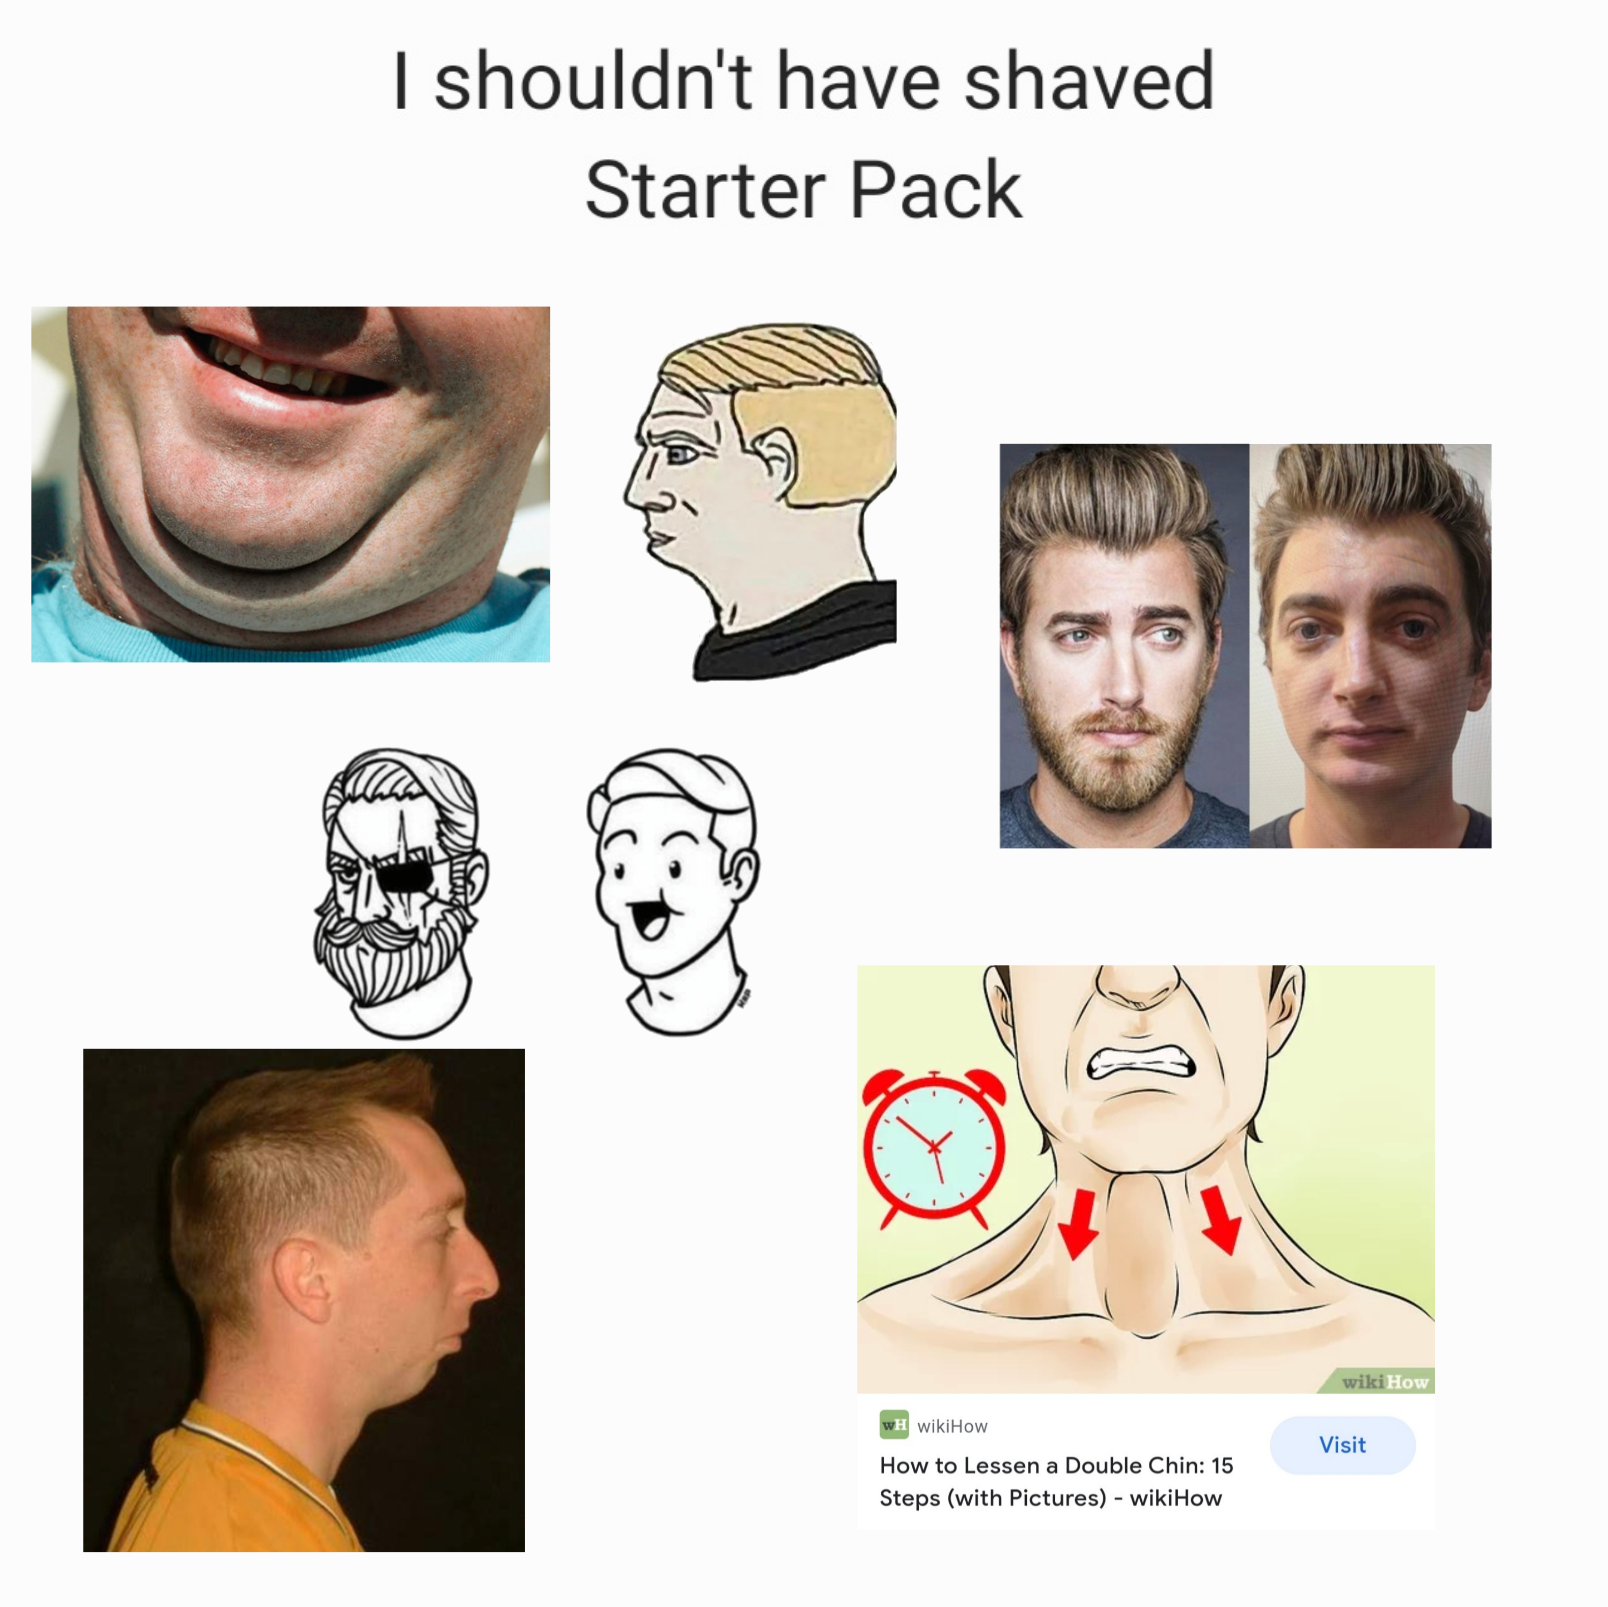 head - I shouldn't have shaved Starter Pack Visit How to Lesson a Dout Steps with Pictures wikiHow